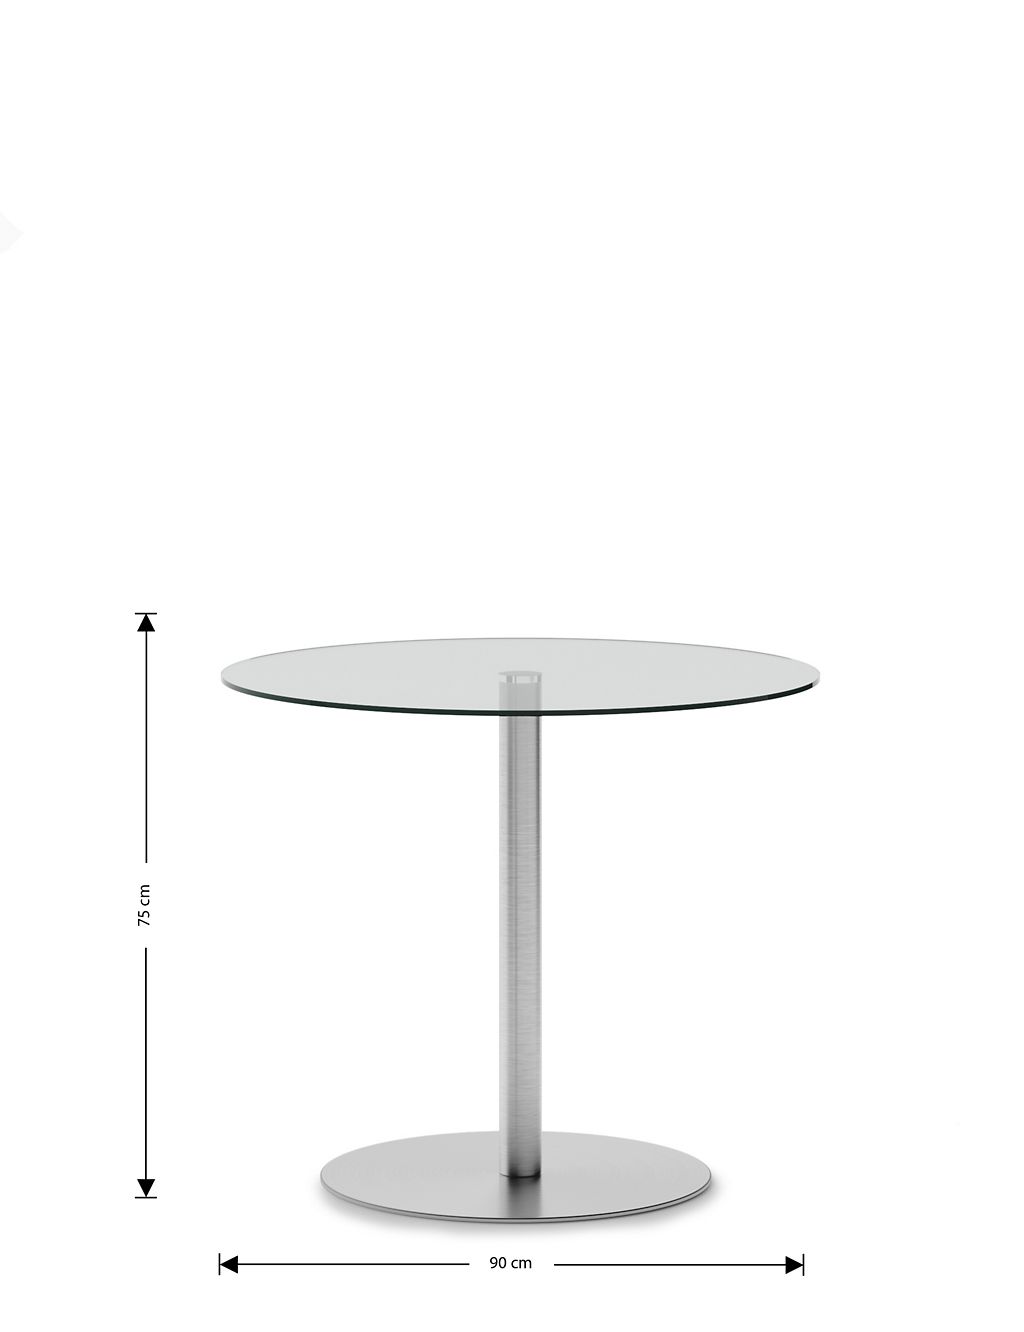 Huxley 4 Seater Pedestal Dining Table 5 of 8